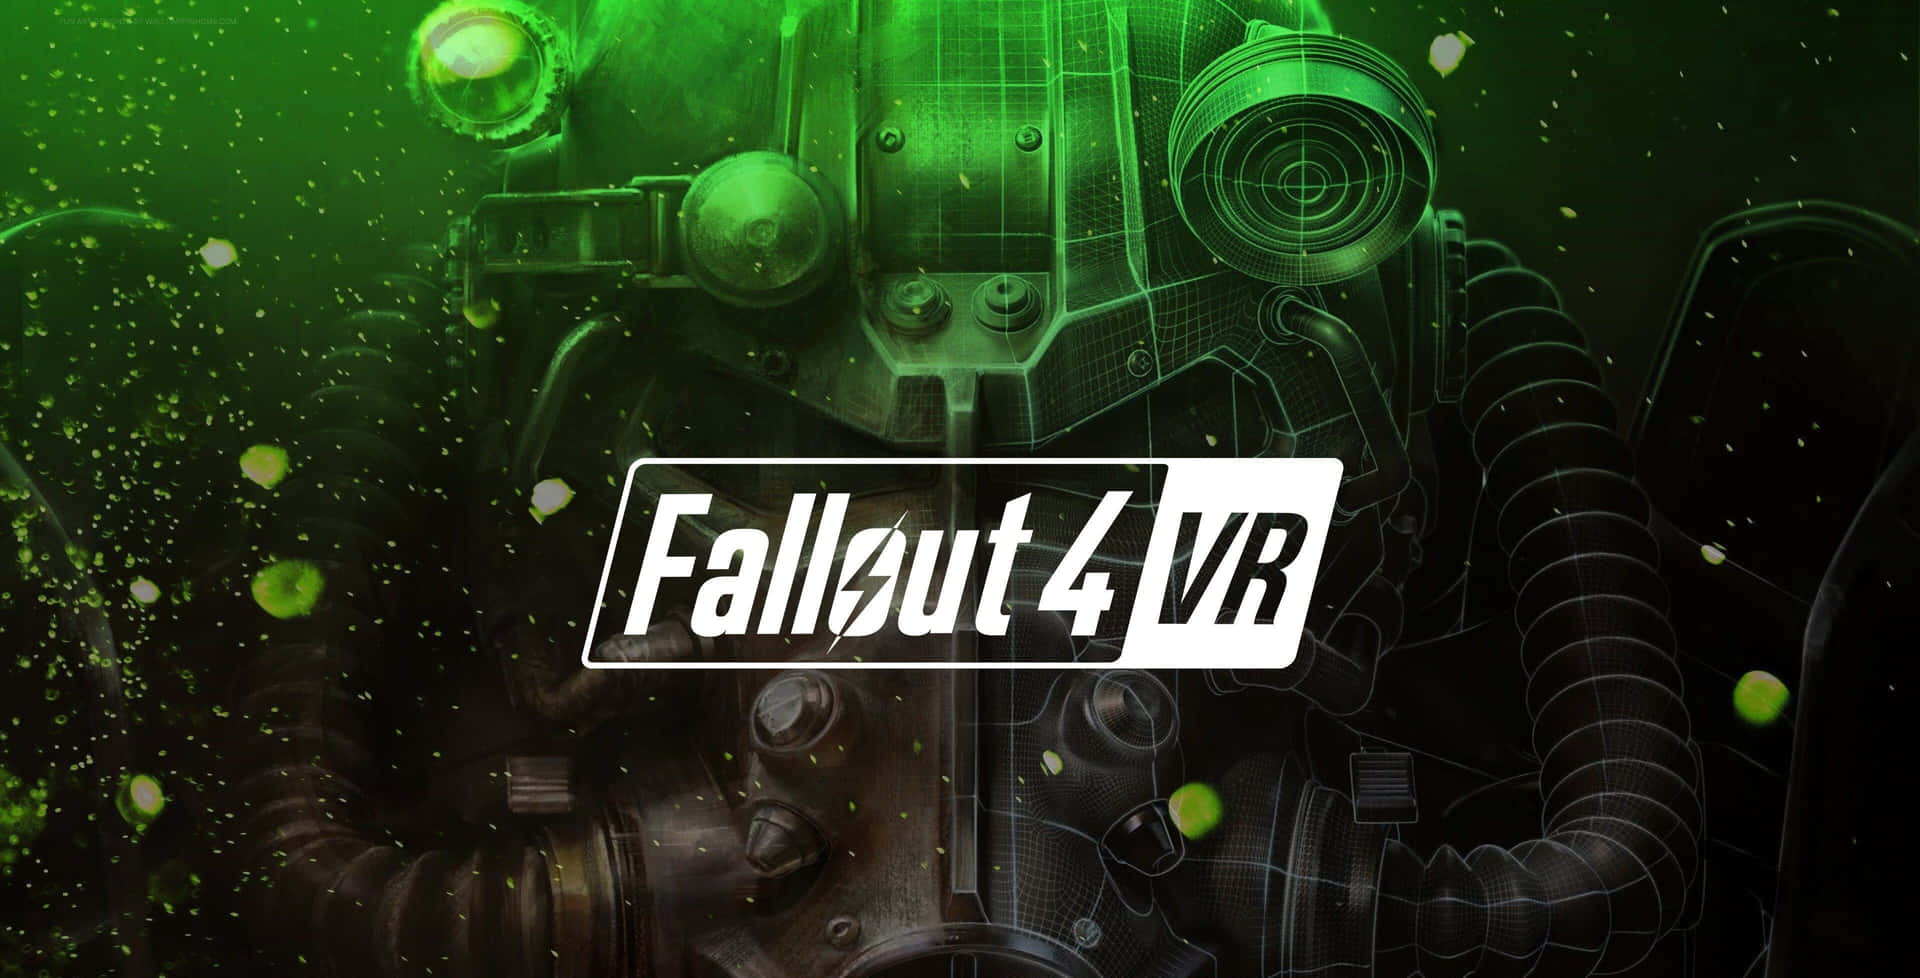 Imagende Fallout 4 Vr.